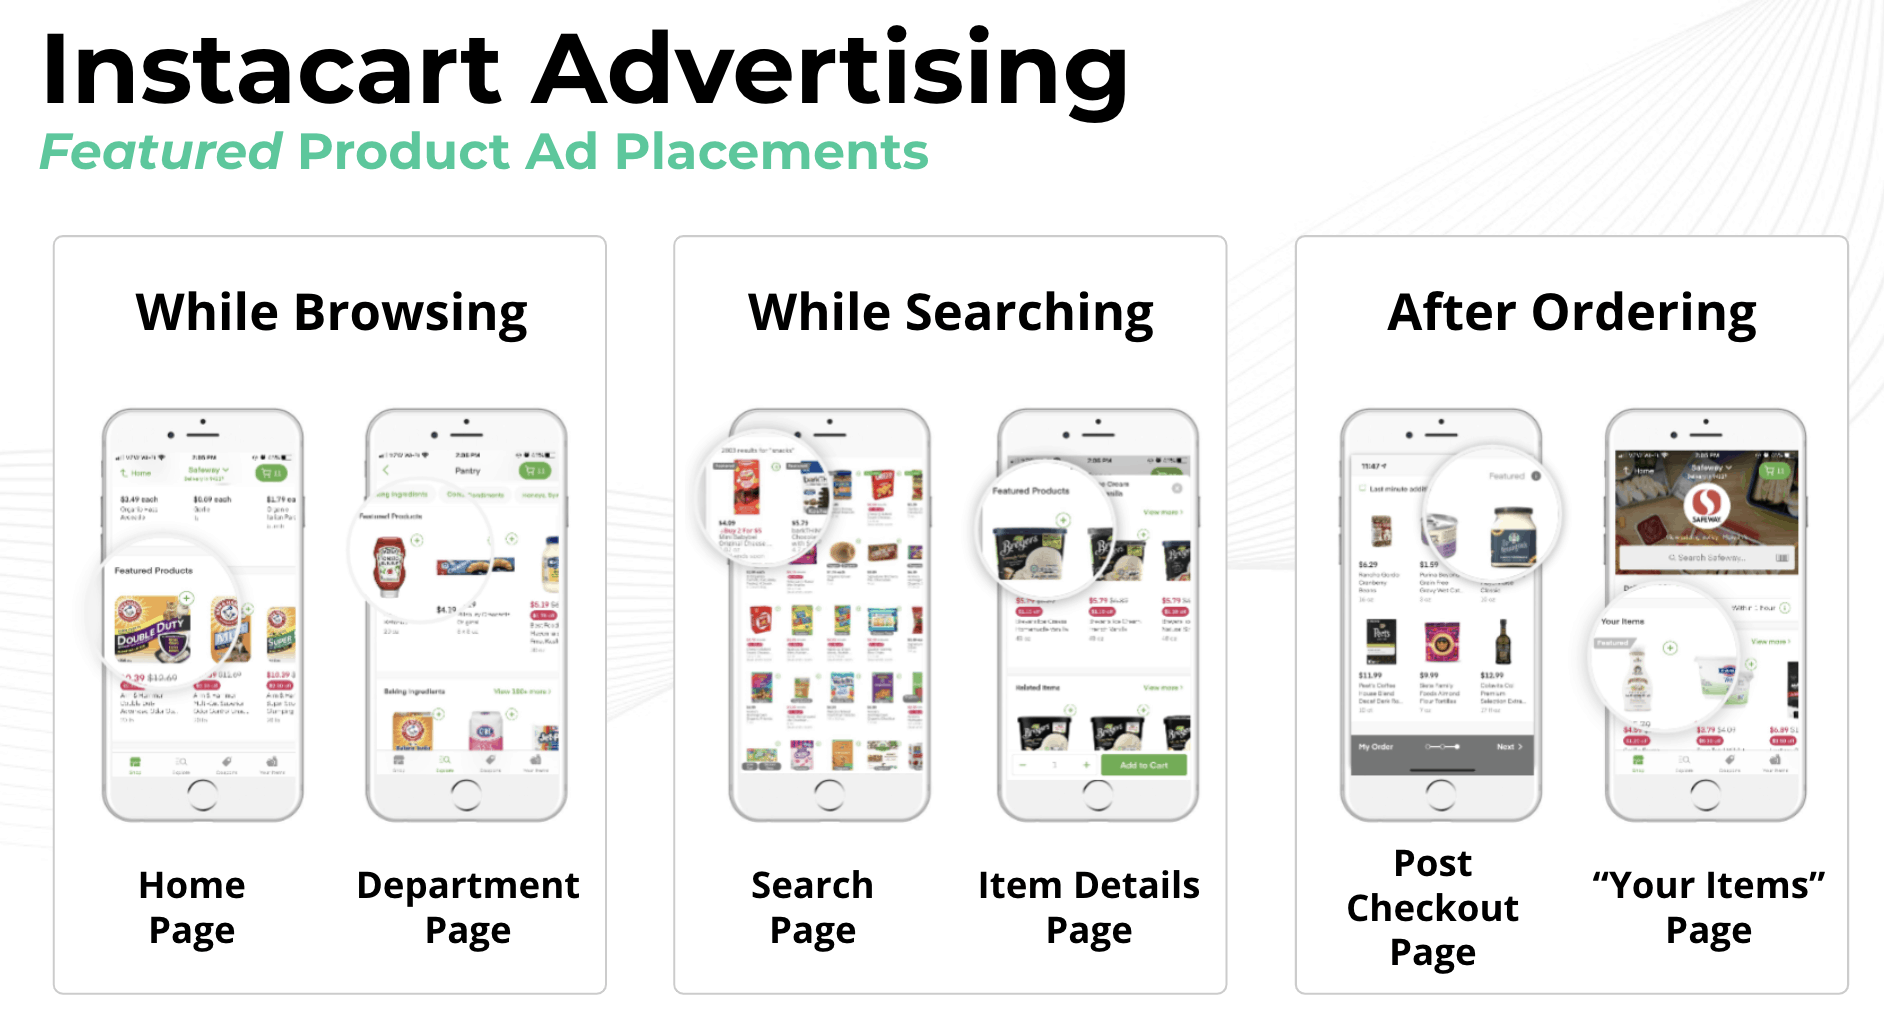 Instacart Advertising Featured Product Ad Placements